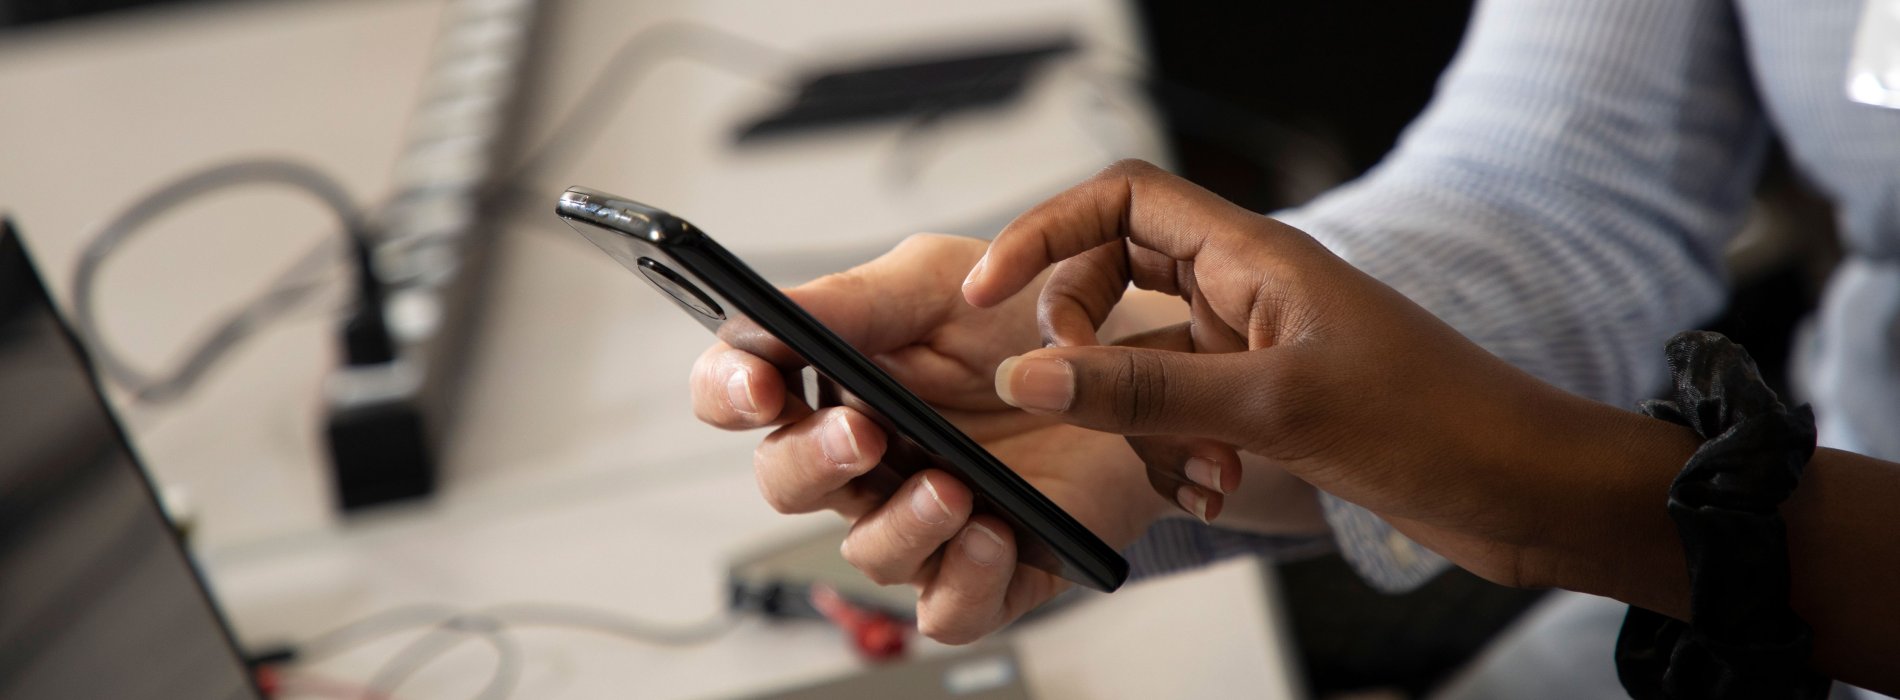 One person's hand holding a black cell phone and the other person's hand poised over the screen.